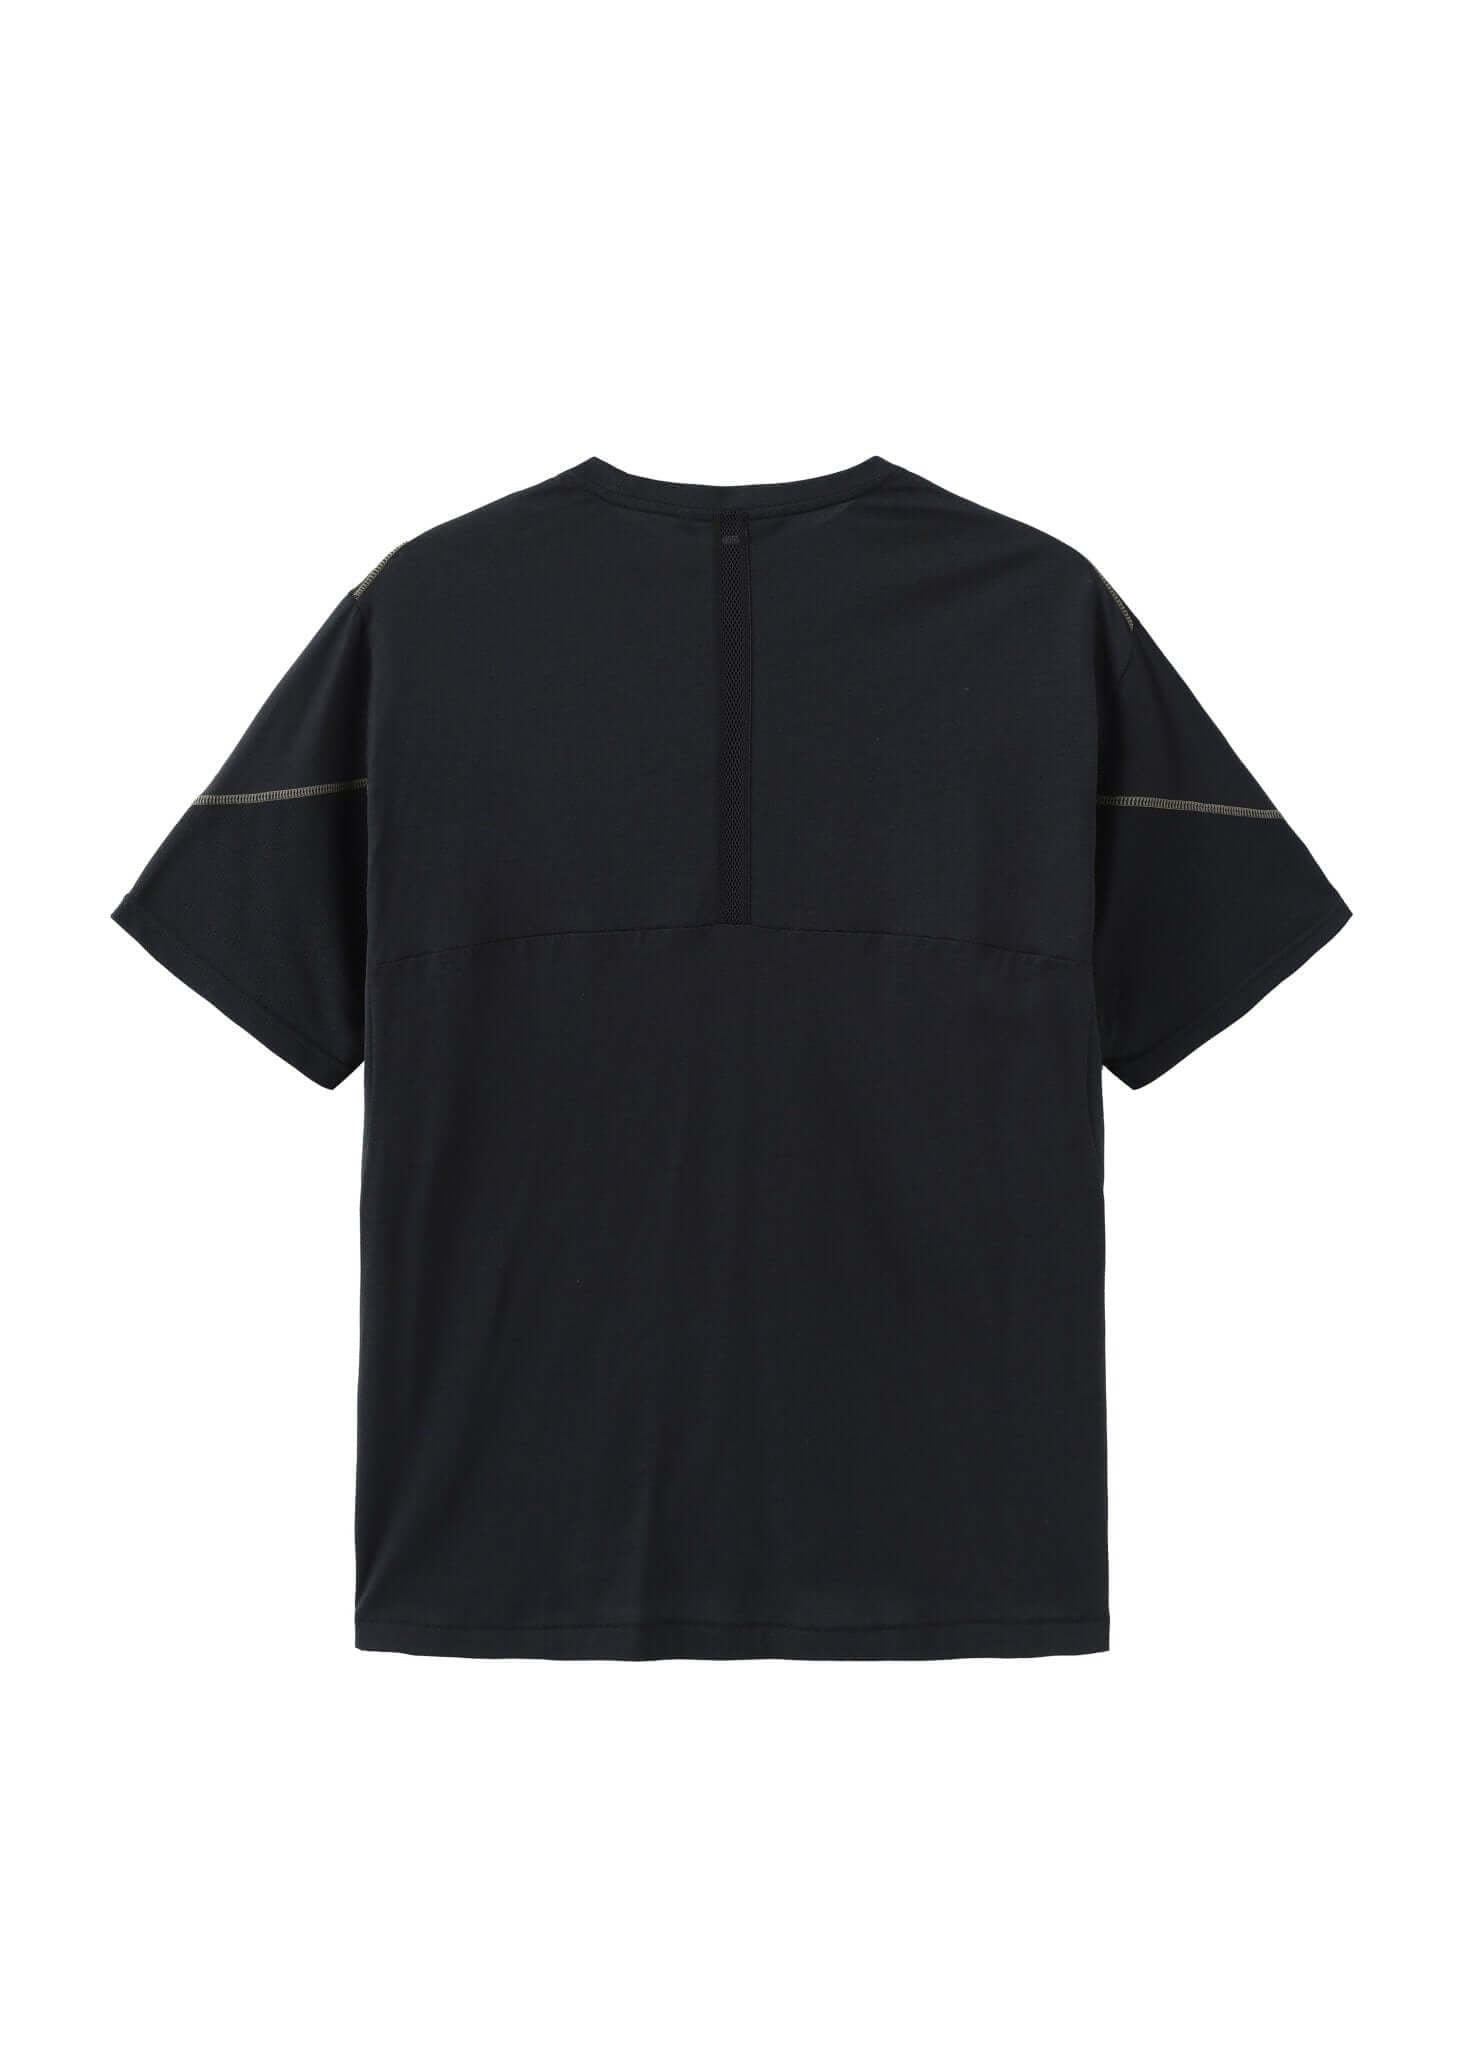 Top Stitched Panel T-Shirt With Zip Pockets - NILMANCE